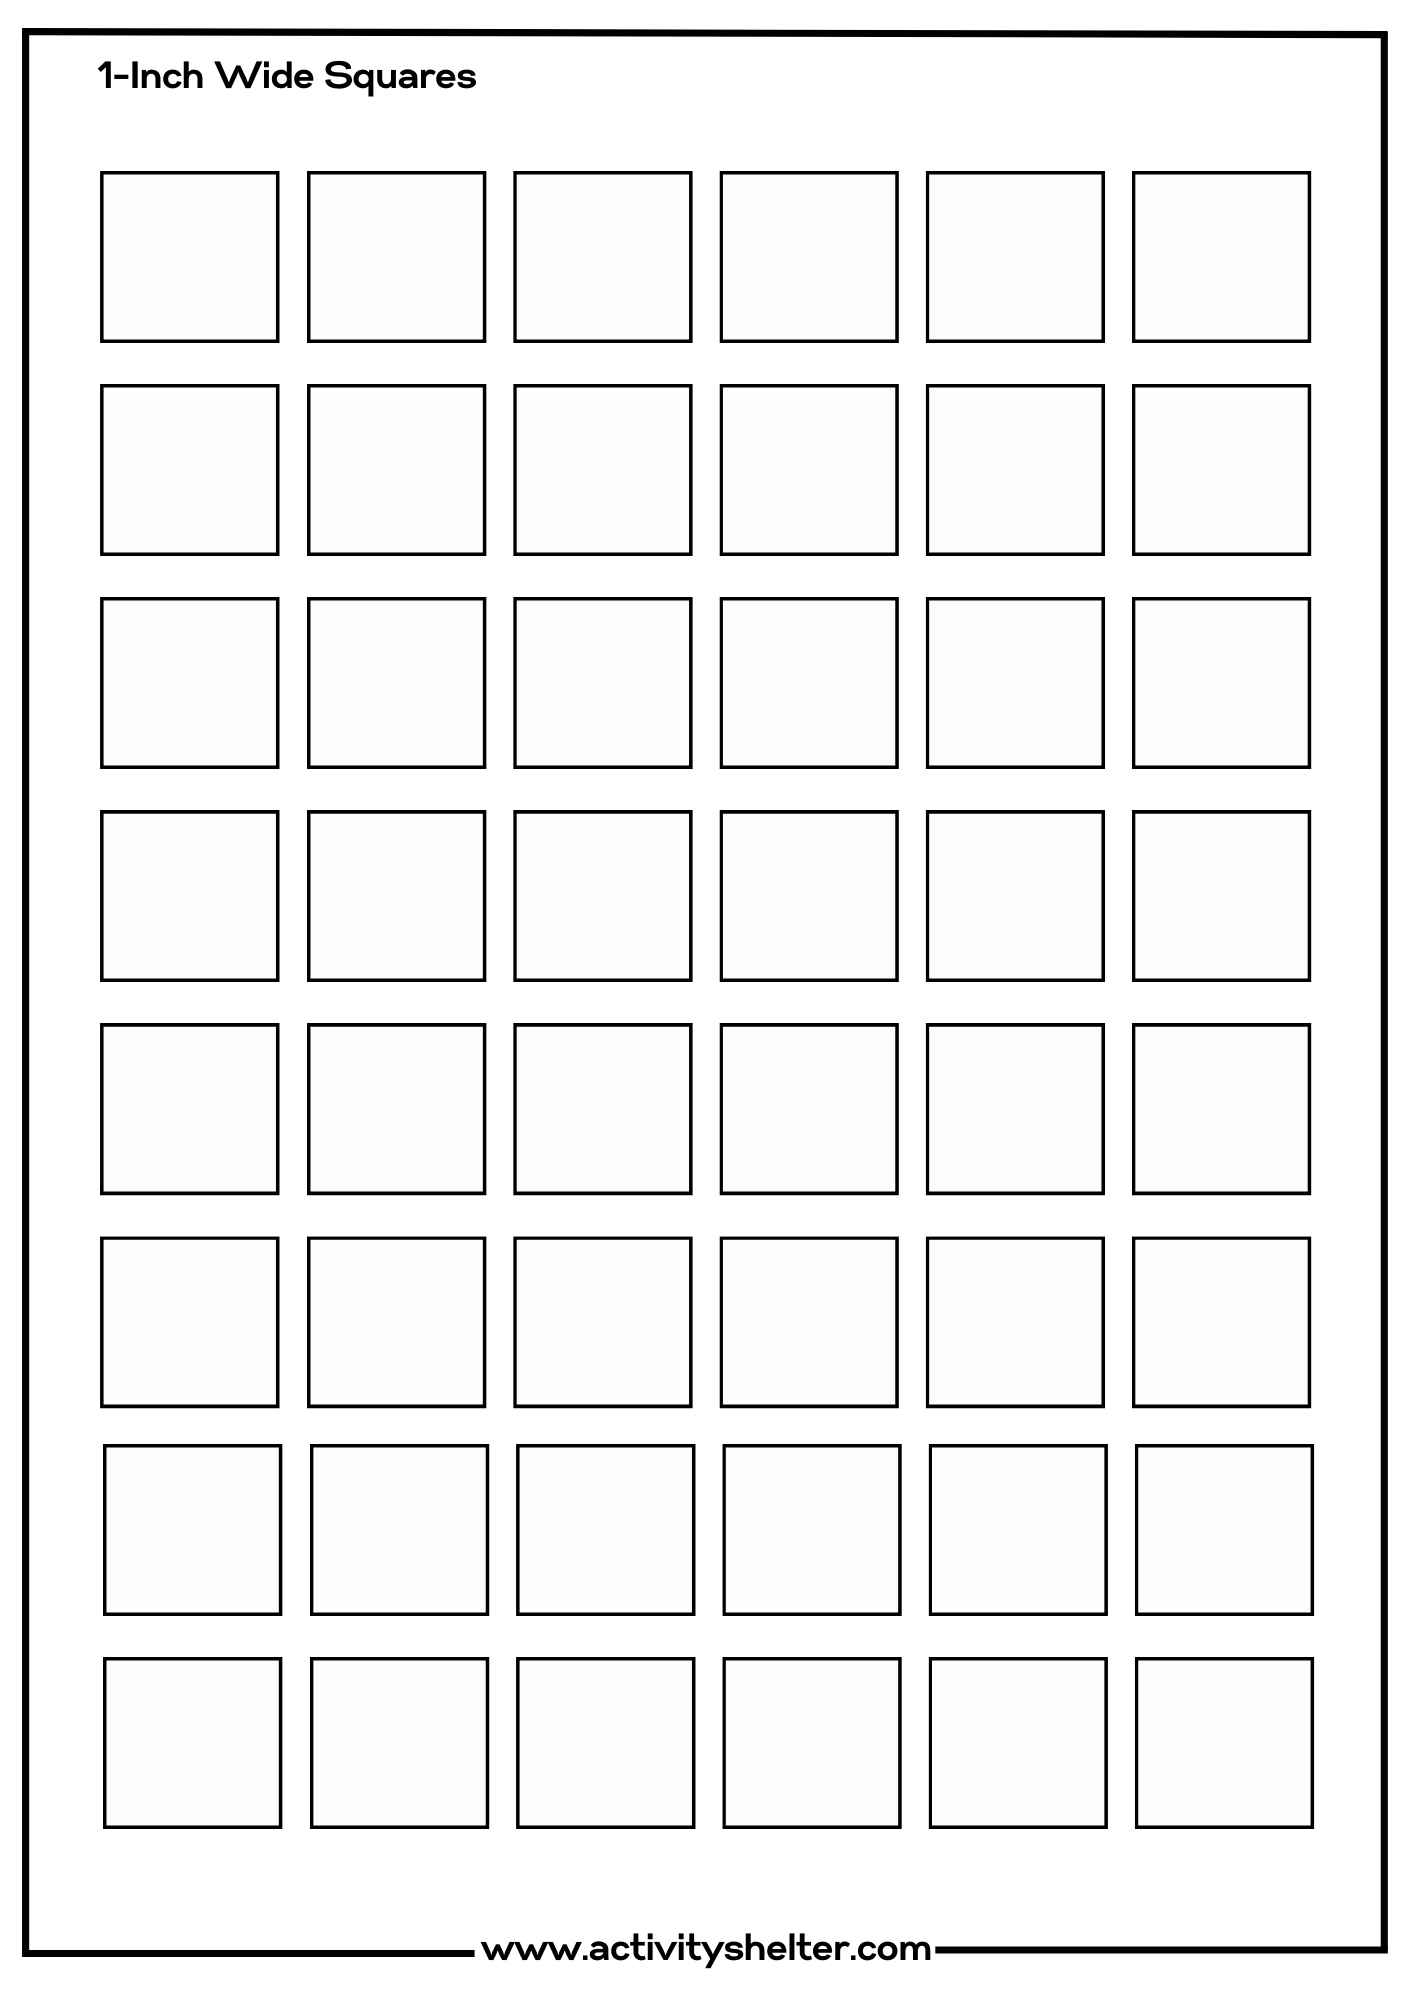 Square Printable 1-Inch Wide